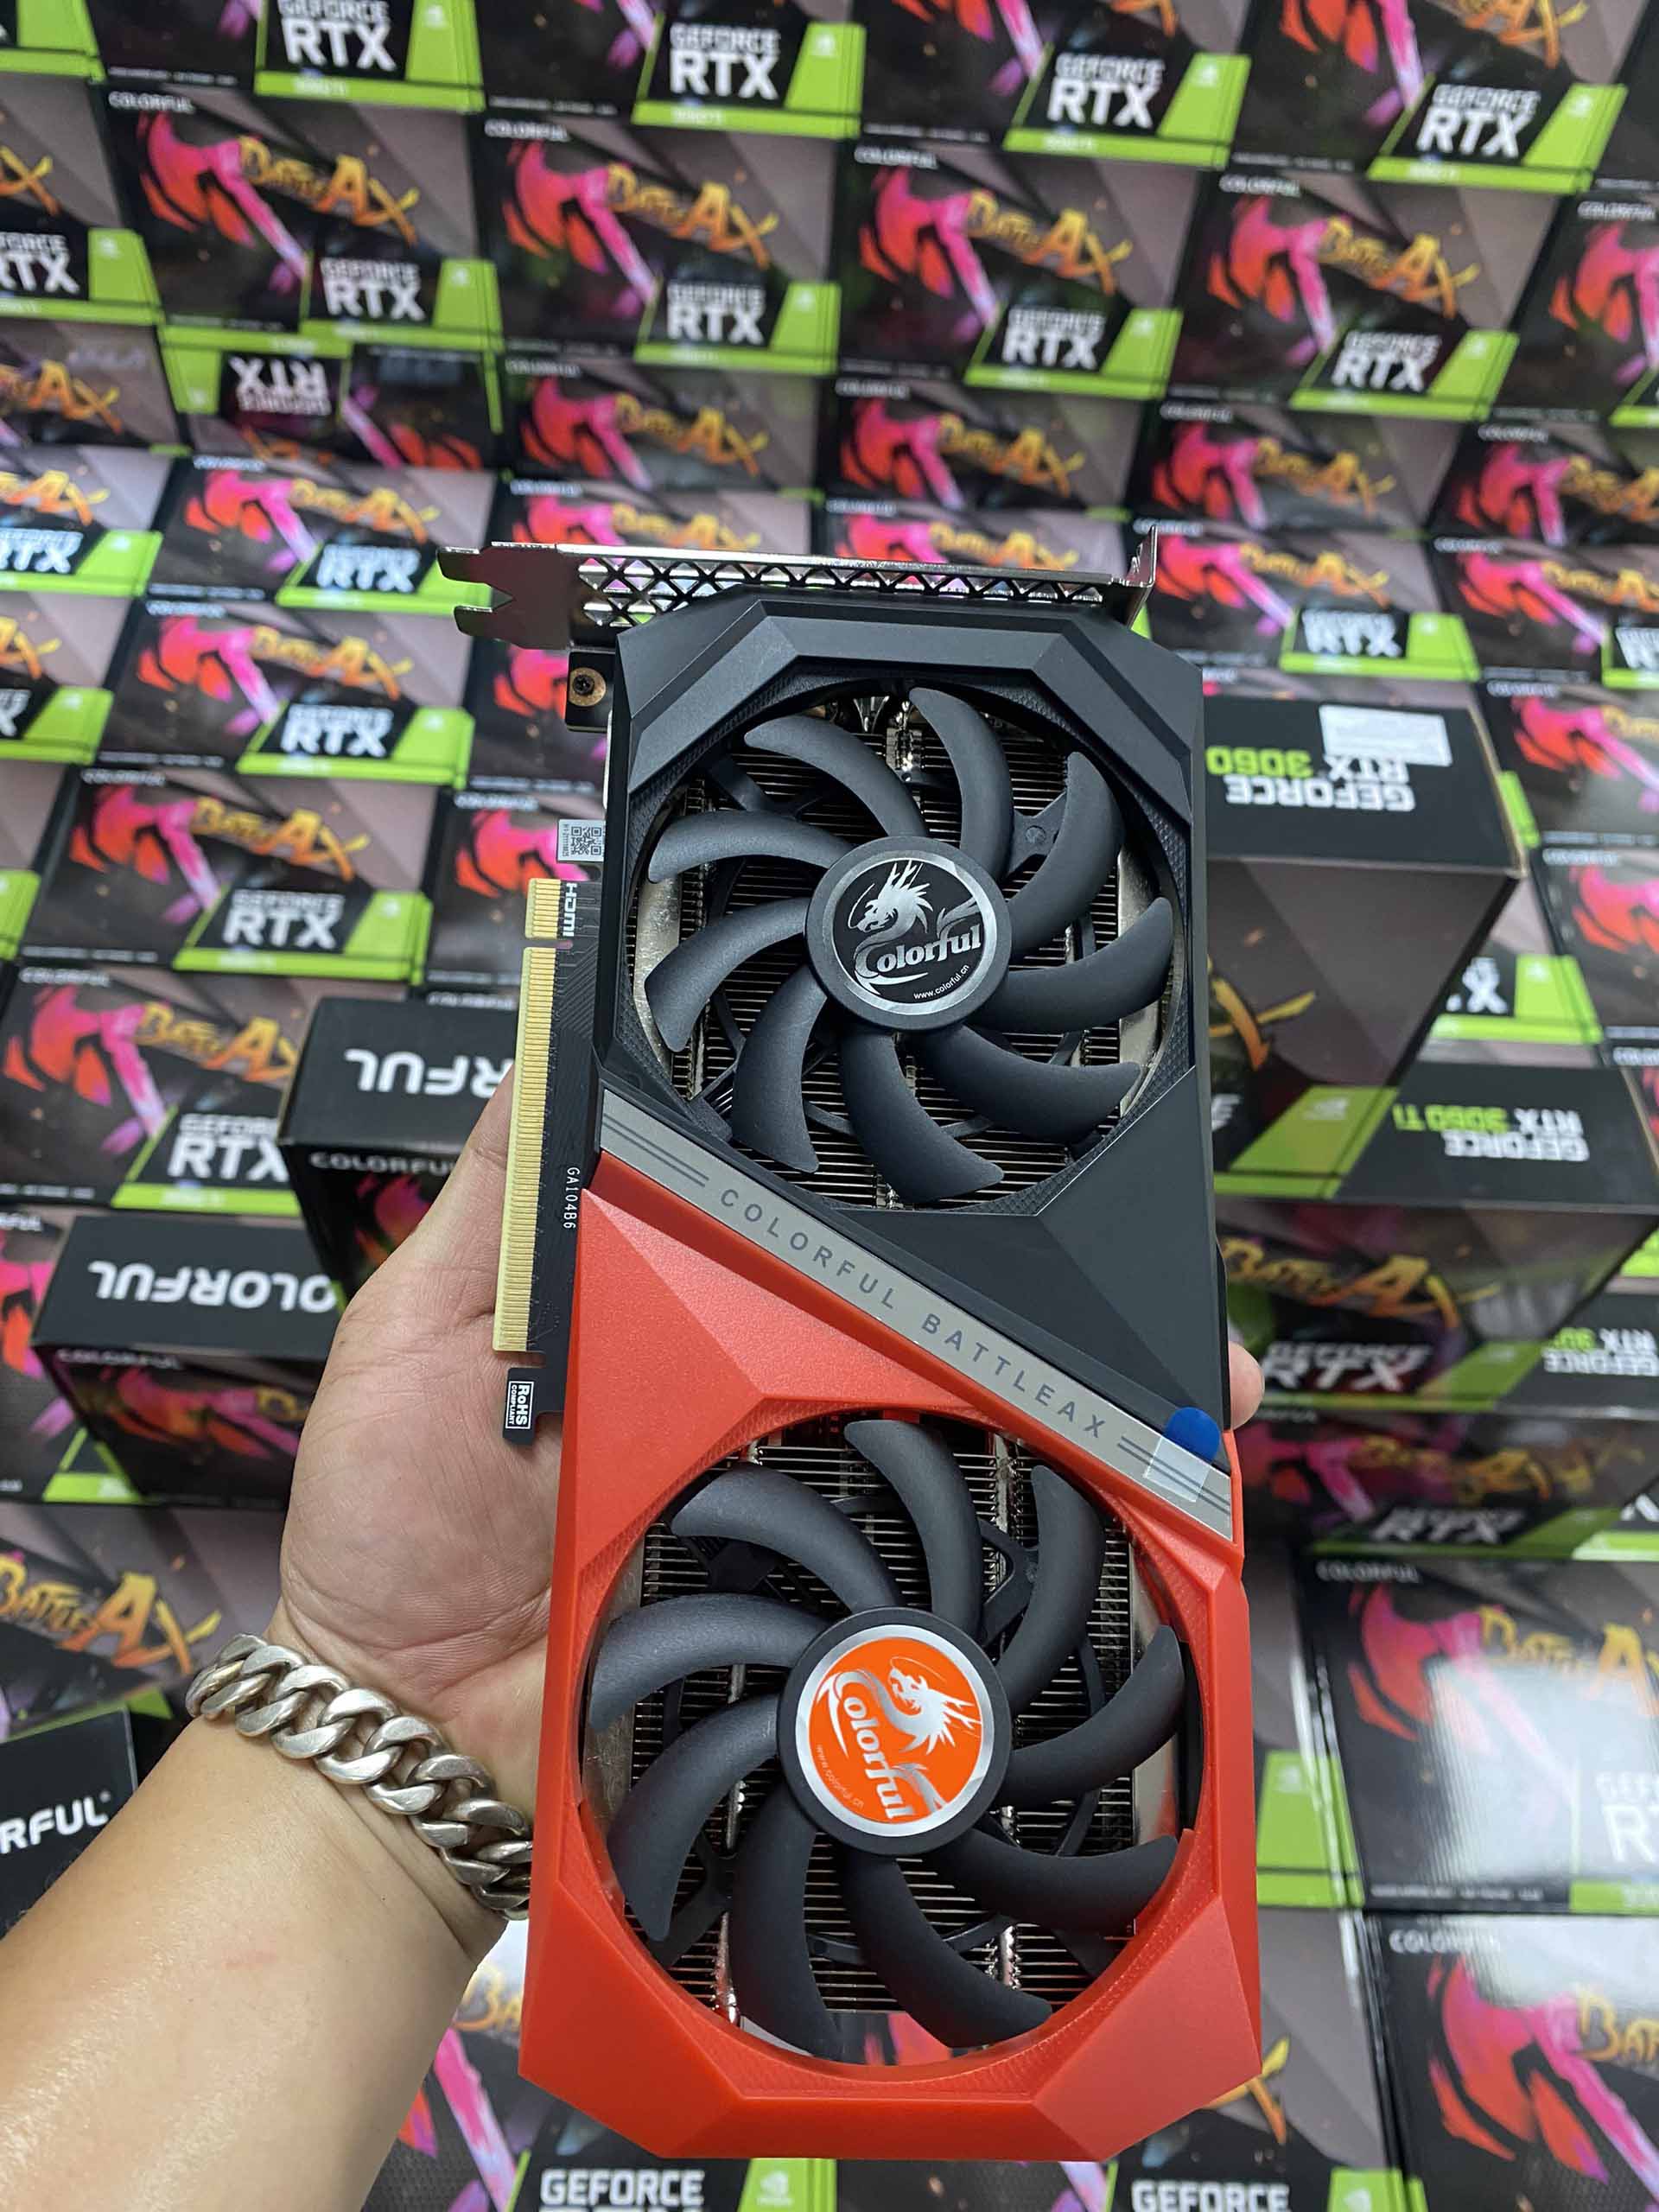 Colorful GeForce RTX 3060 Ti NB DUO LHR-V